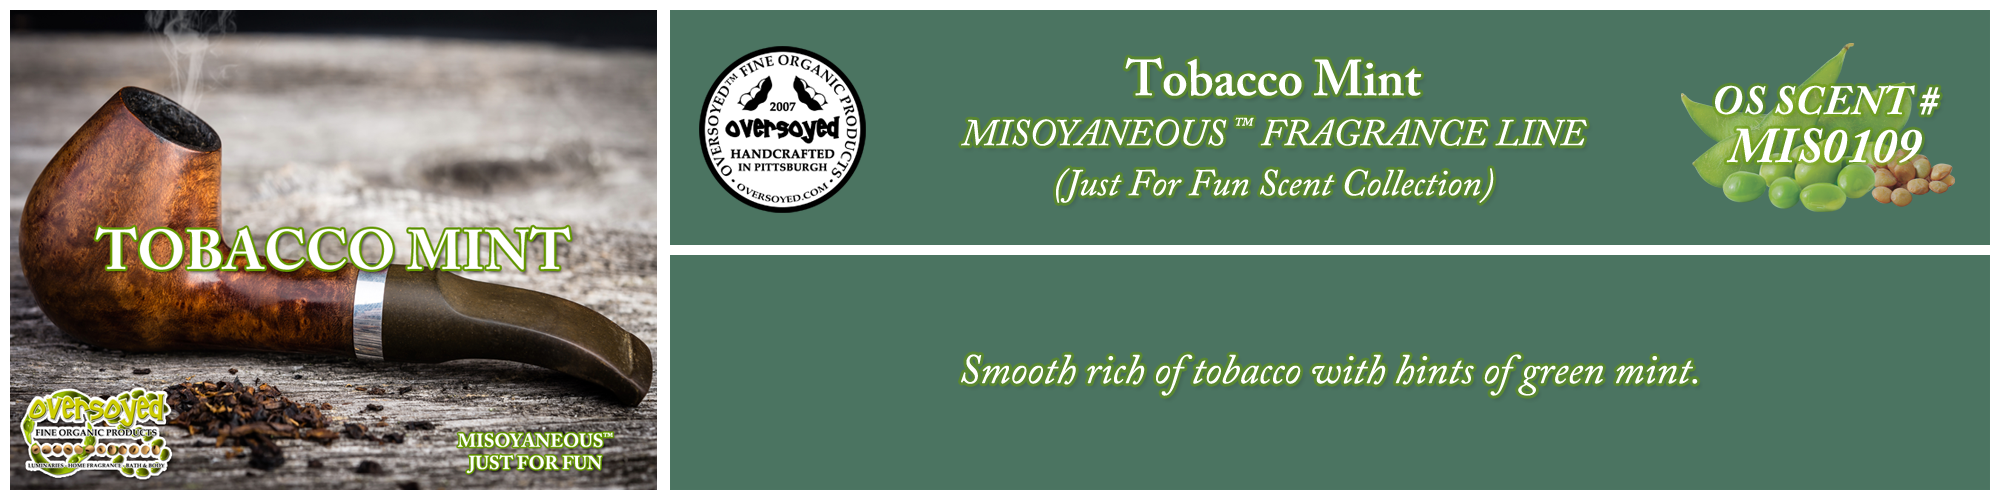 Tobacco Mint Handcrafted Products Collection